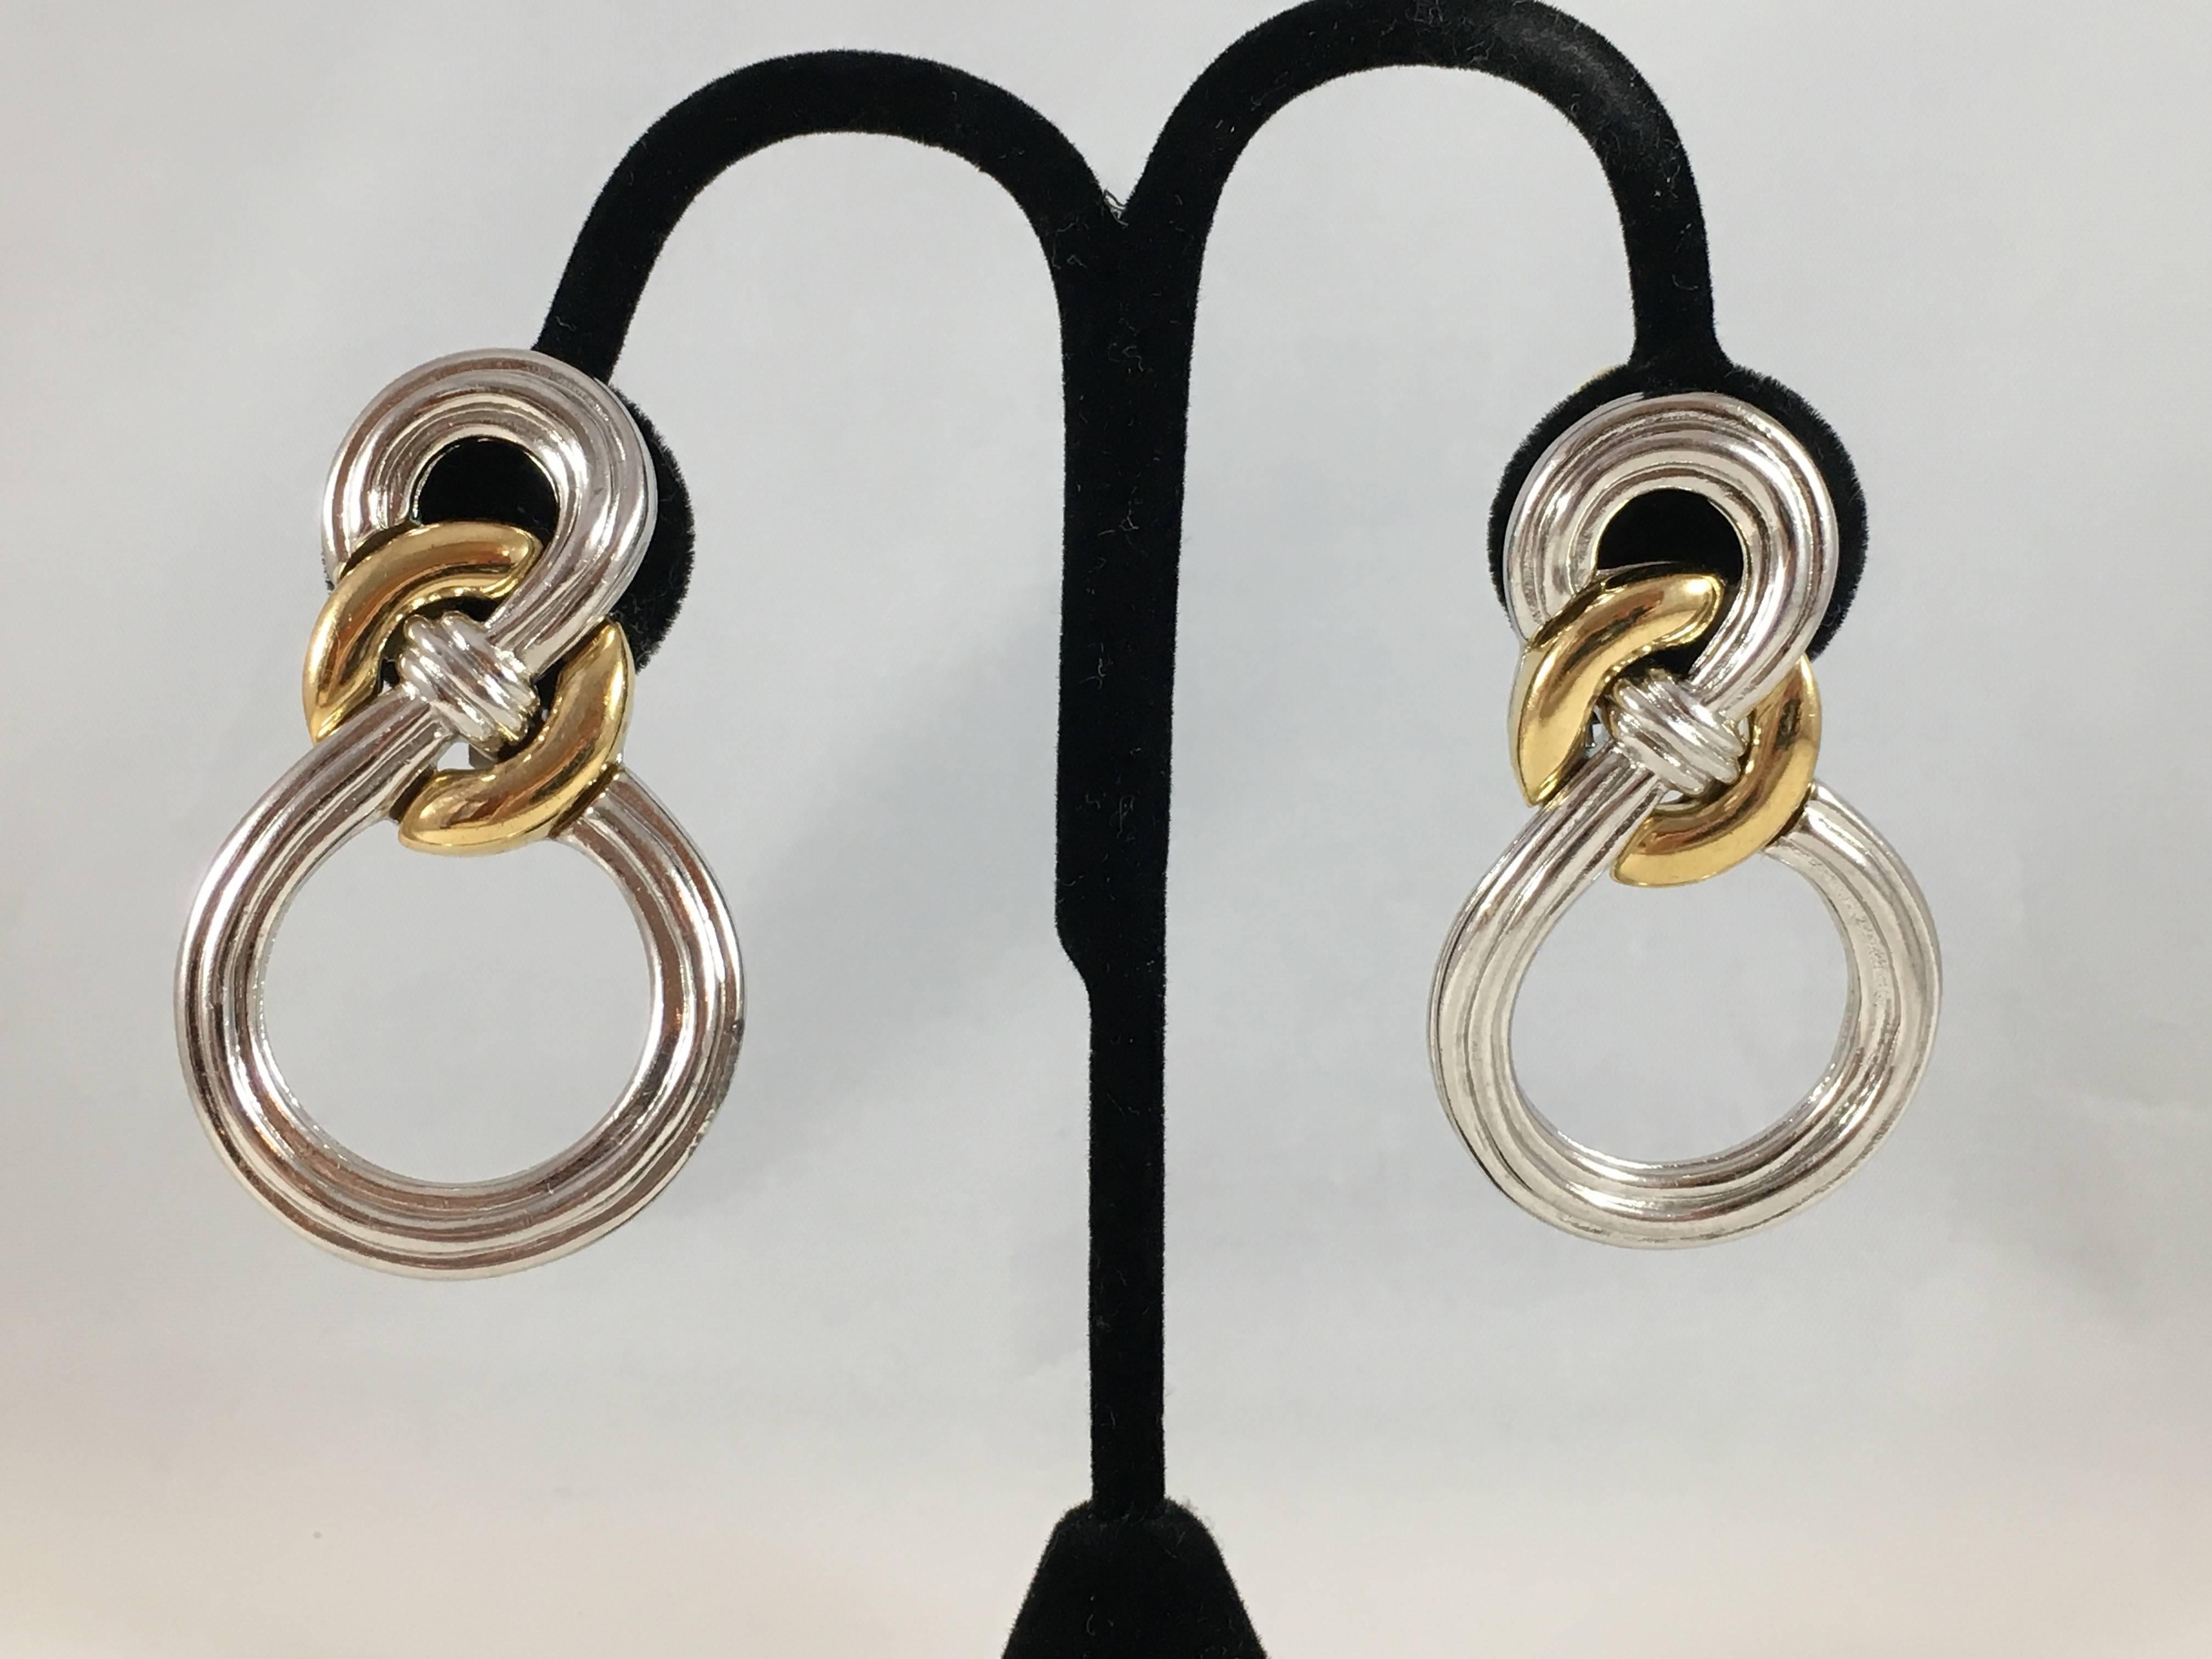 This is an amazing pair of large 1980s Givenchy clip-on earrings. They are made out of silvertone and goldtone metal. They are in excellent condition and signed 'Givenchy' in a plaque on the back of the earrings (see image 5). They are large,